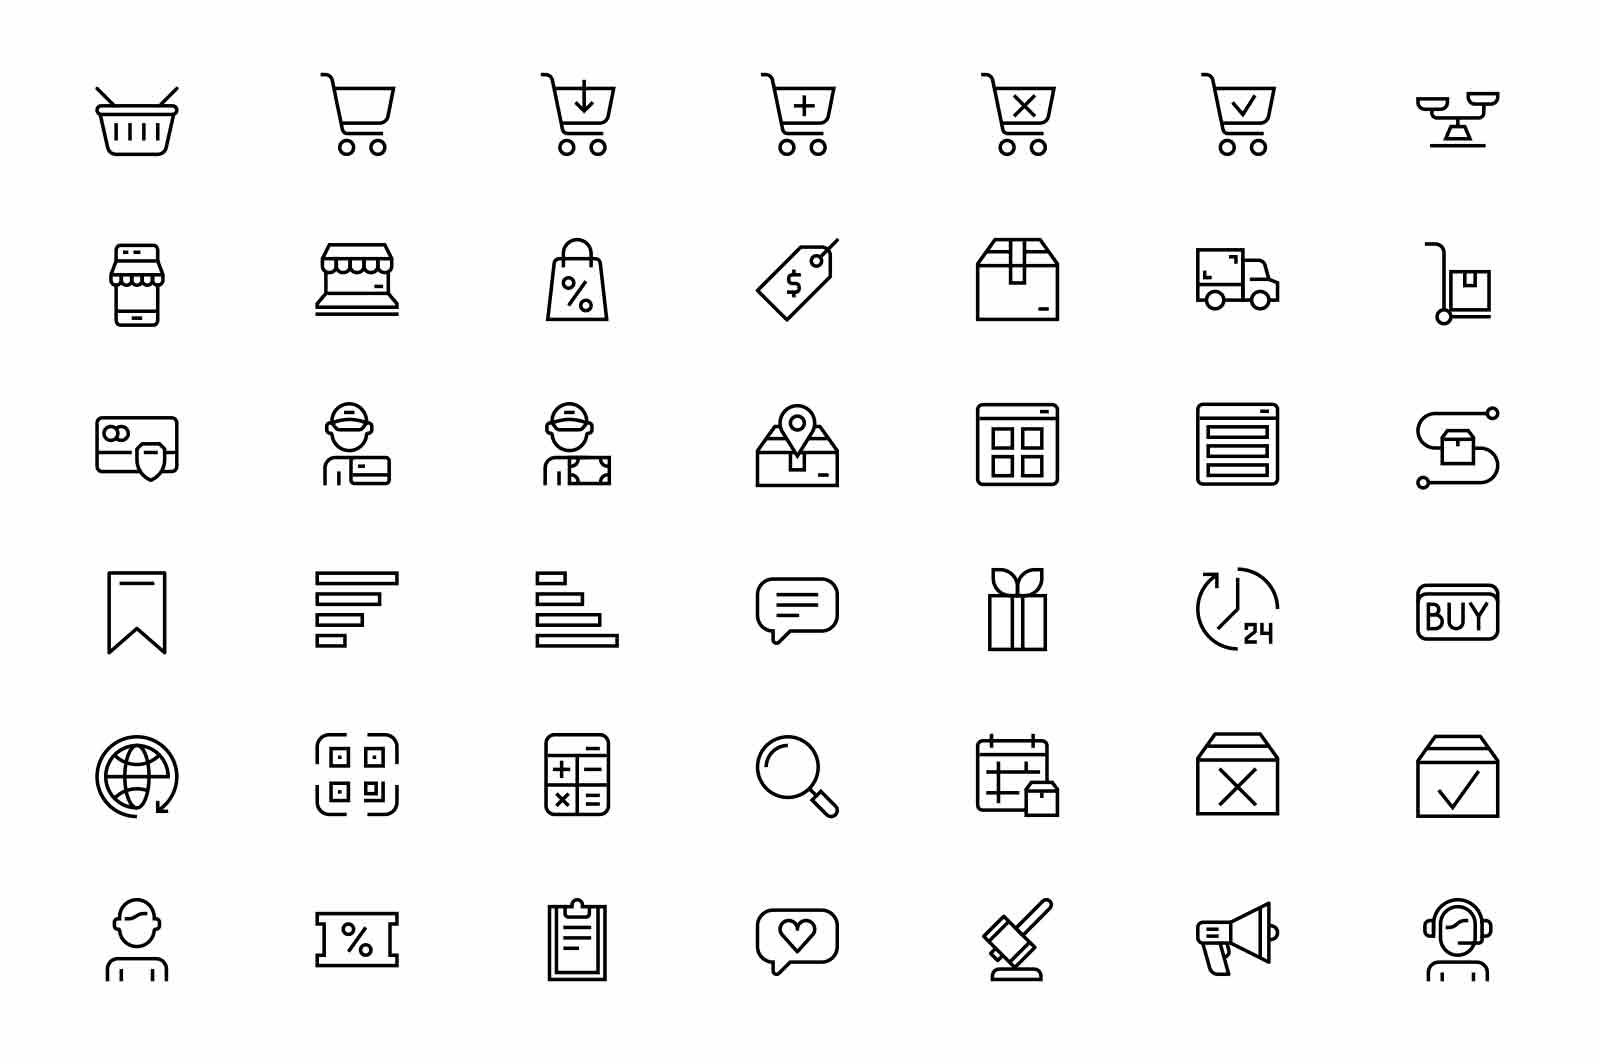 Online shopping and making order icons set vector illustration. Shopping cart, assortment, sale line icon. Shop from home, pay online concept